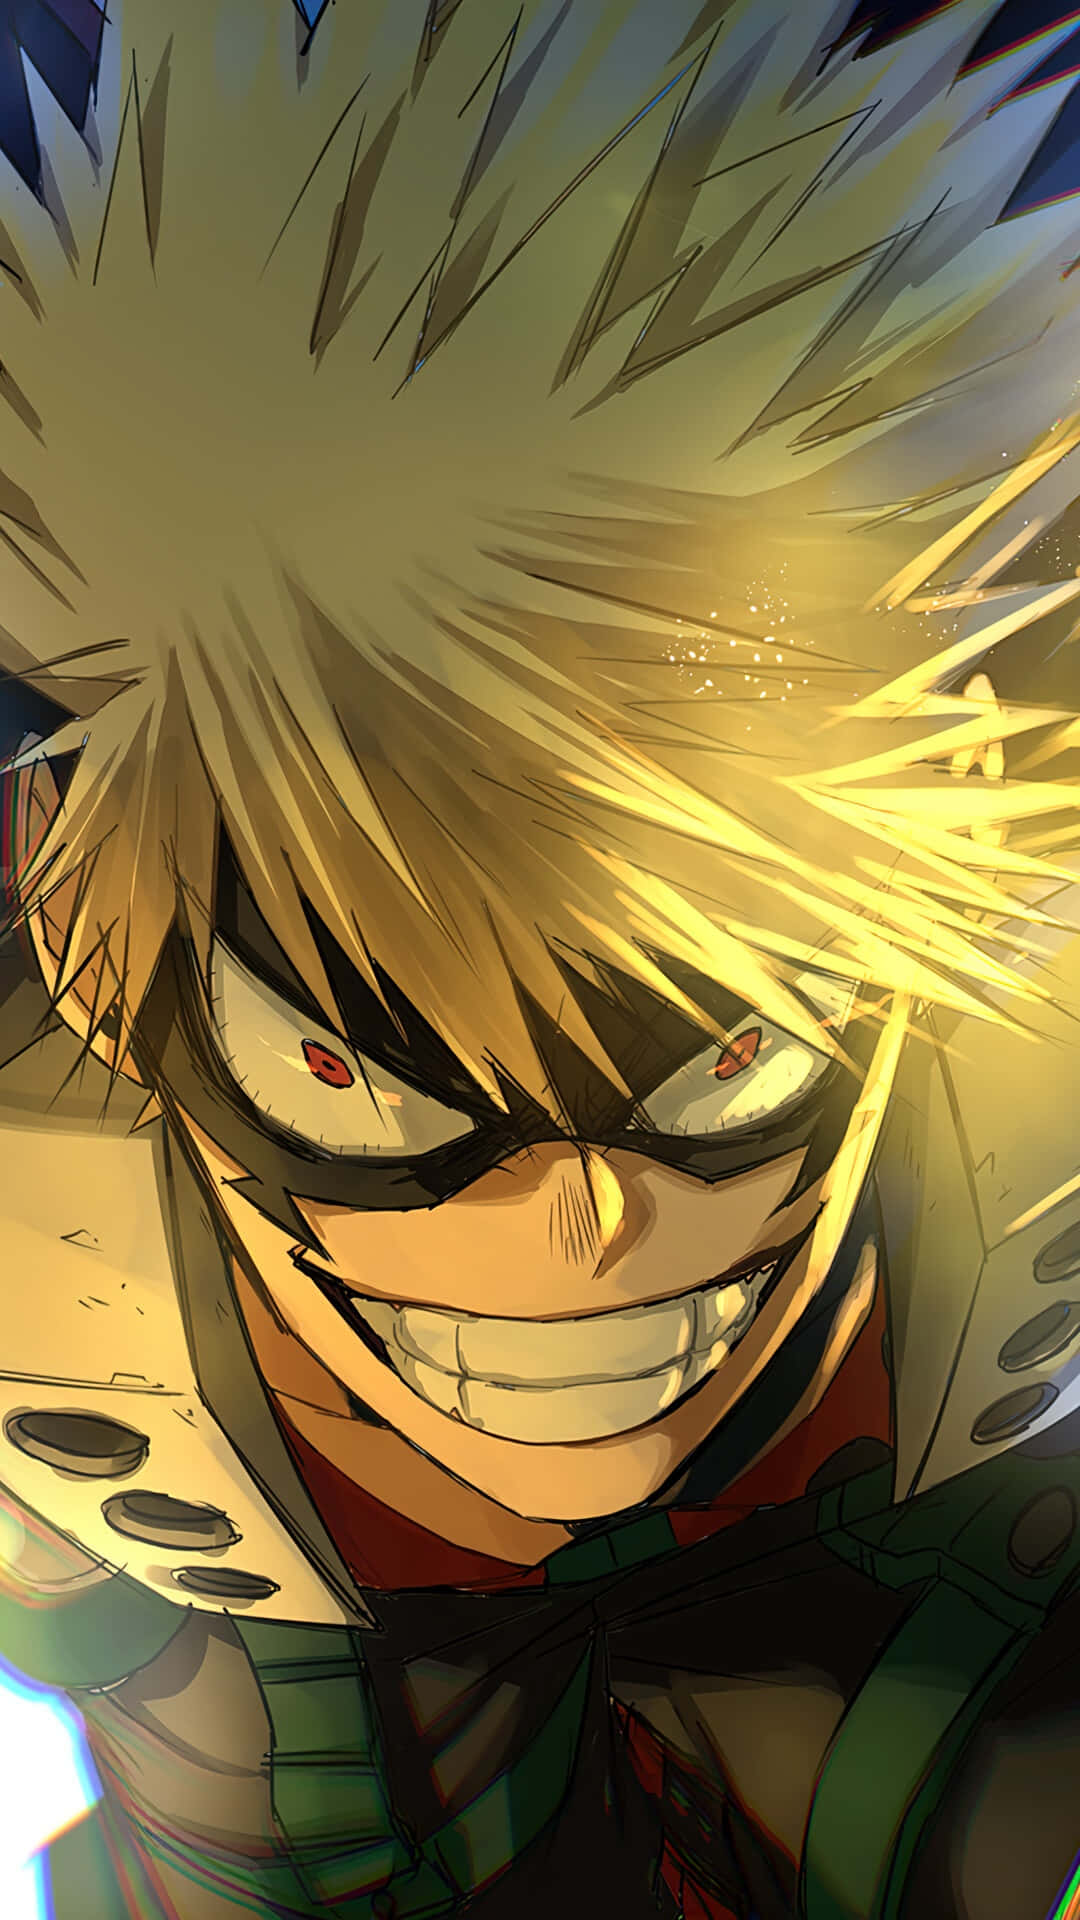 Get ready for the power of Bakugo Phone Wallpaper